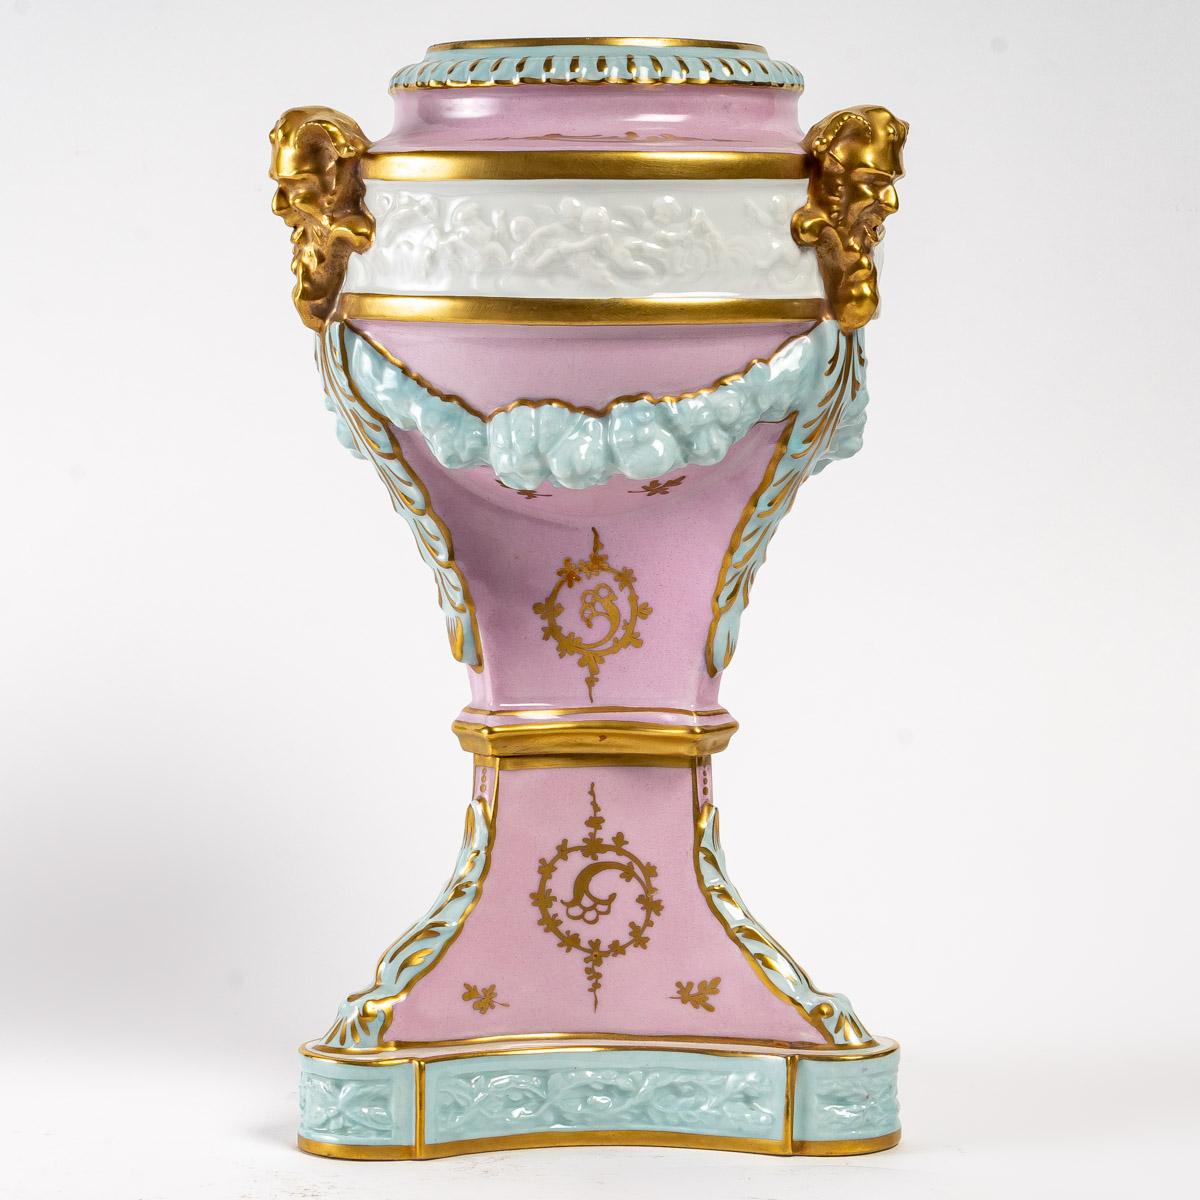 Porcelain vase, late 19th century
Porcelain vase, late 19th or early 20th century, Napoleon III style.
H: 33 cm, d: 22 cm